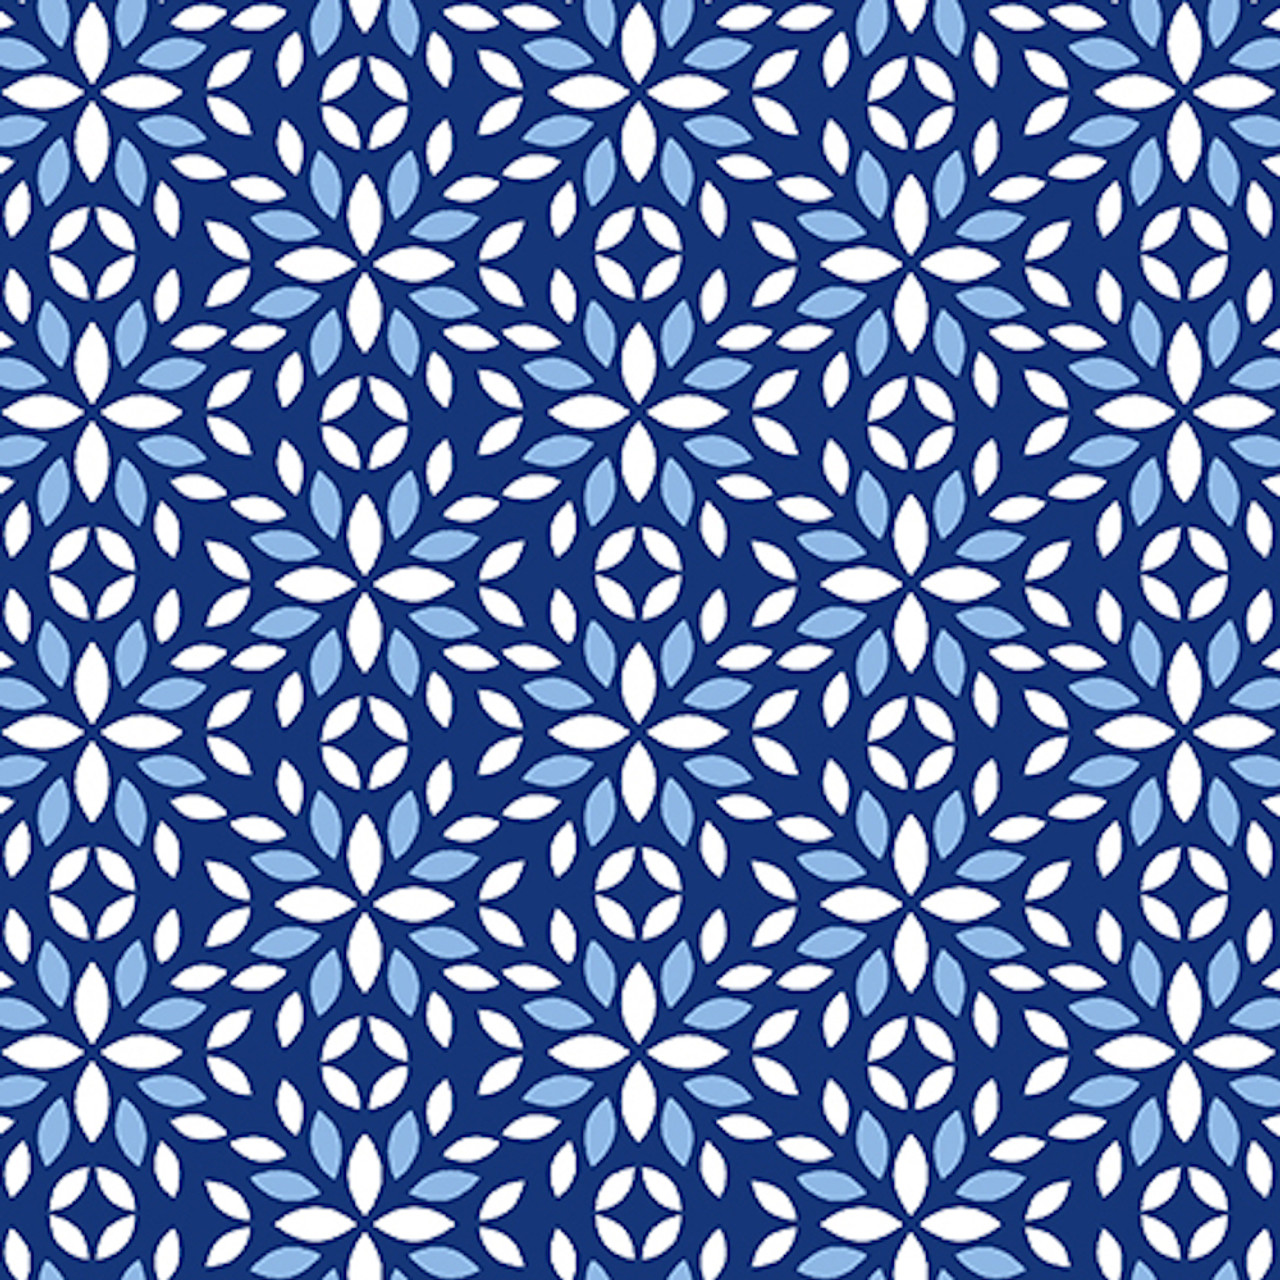 Blank Quilting Anthem Tiles Dk Blue Cotton Quilting Fabric By The Yard